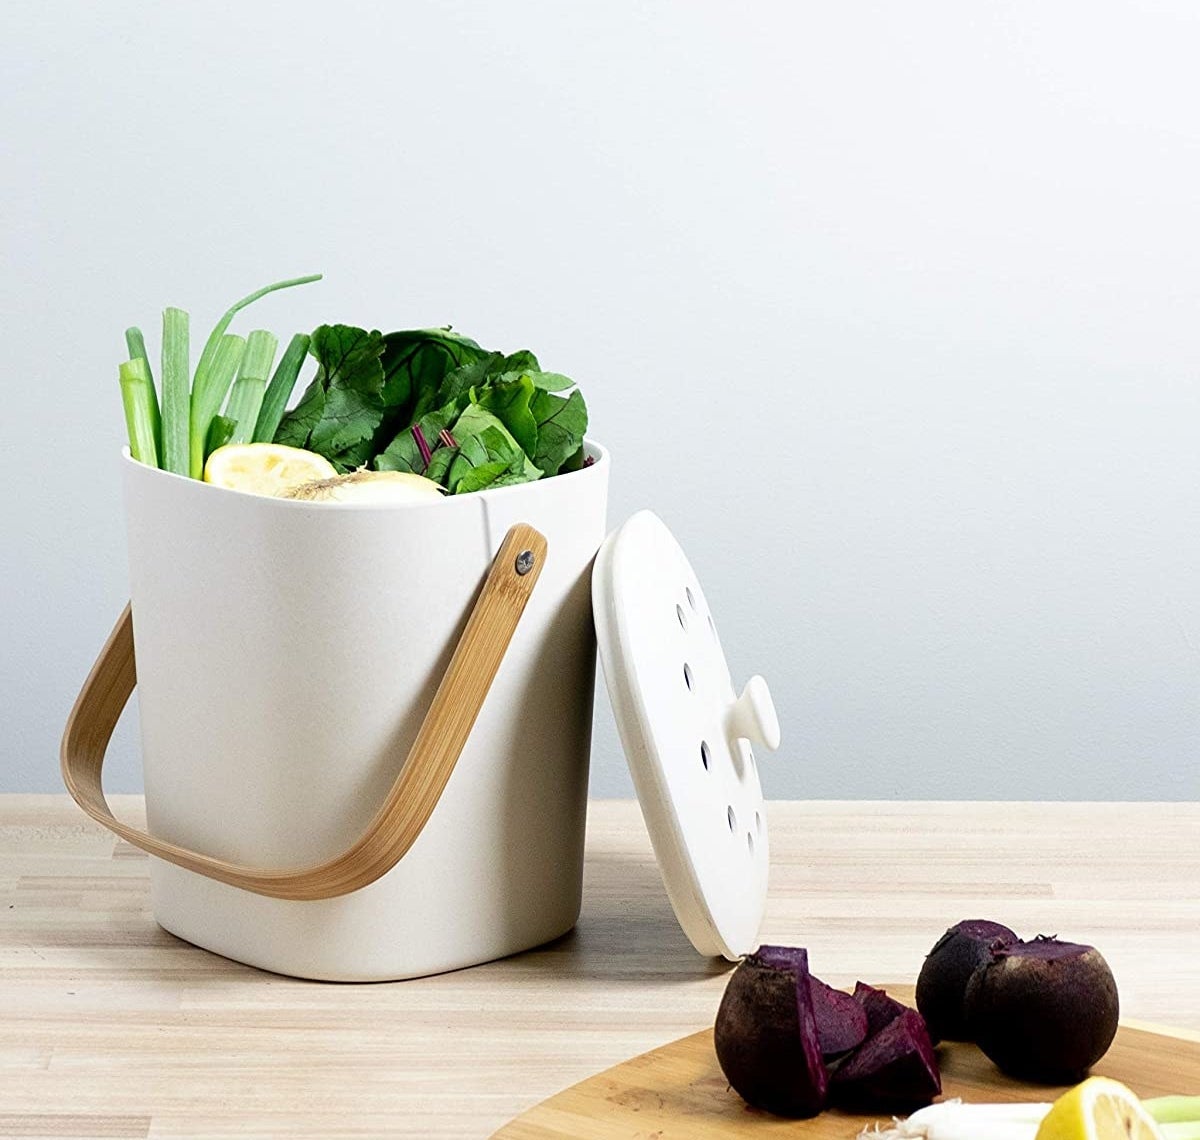 The white biodegradable composter which has a bamboo handle and vented lid